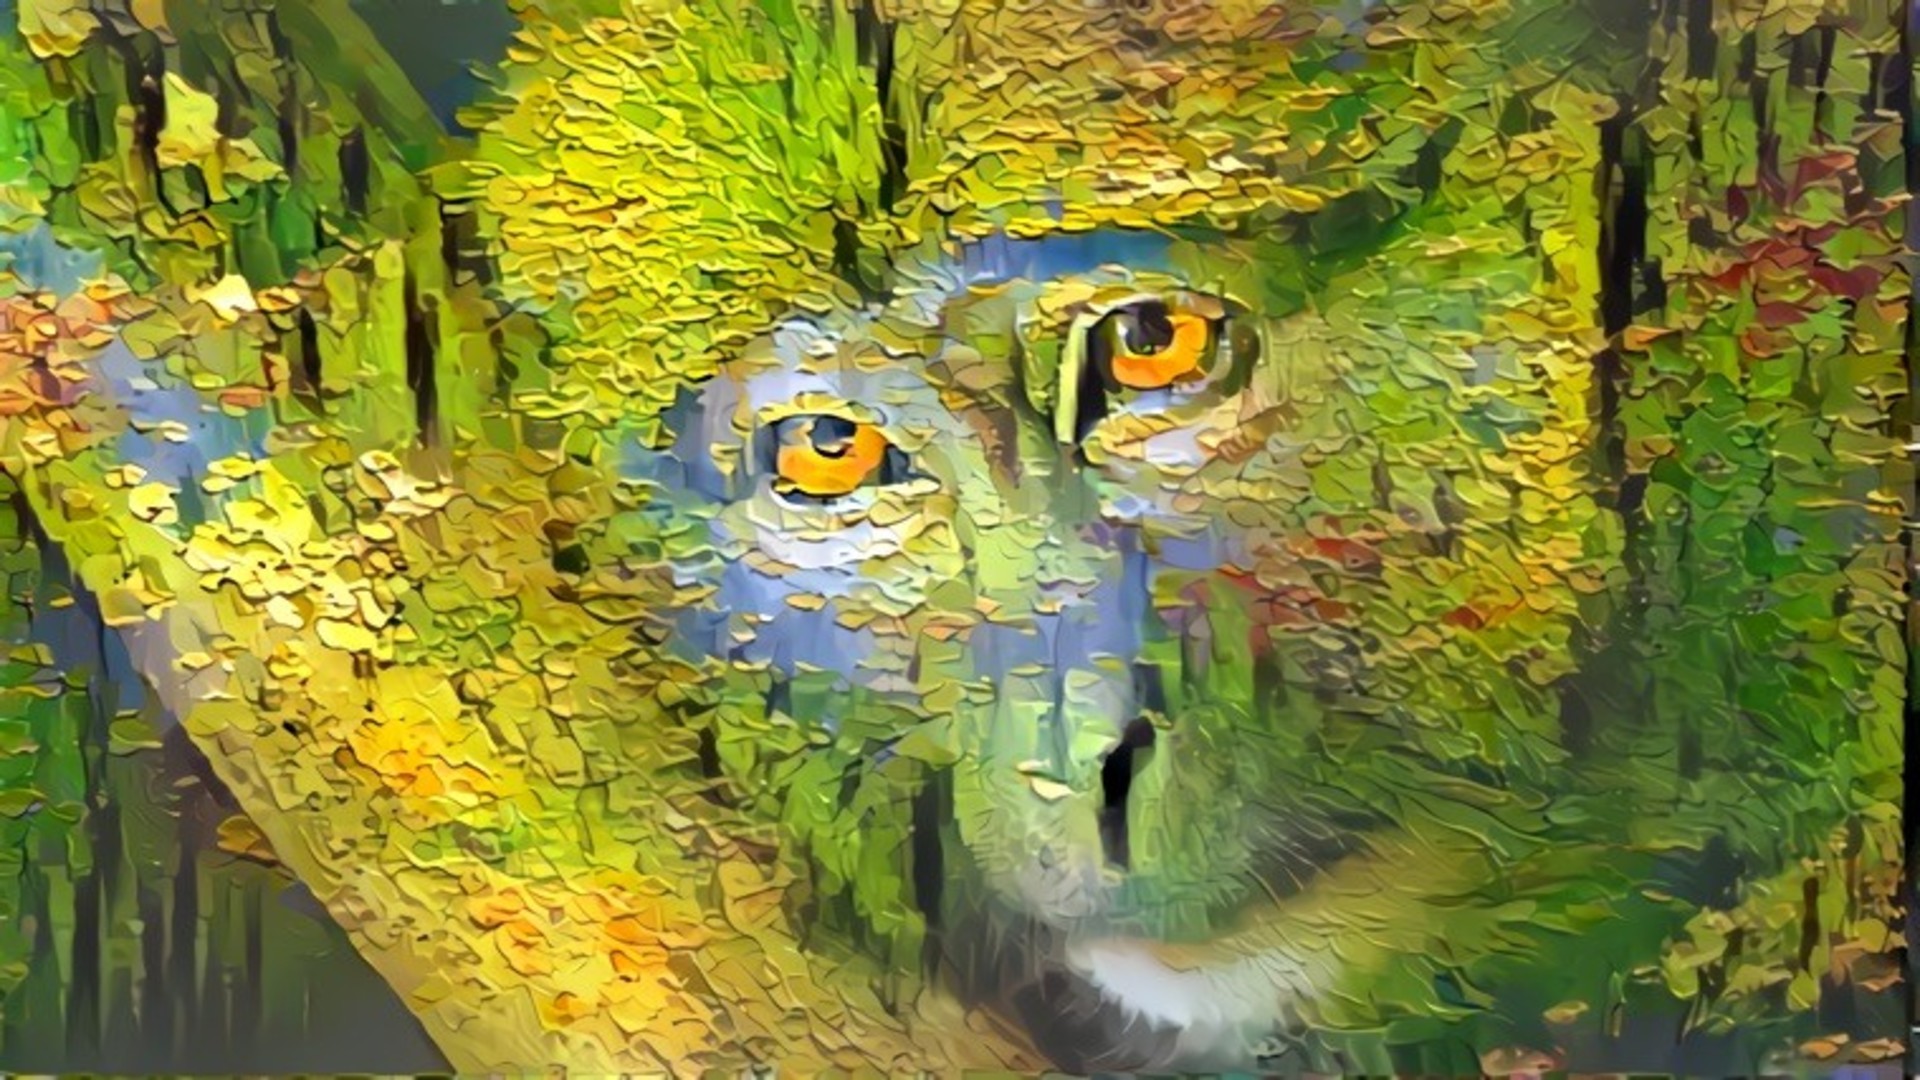 A piece of art I created out of a simple chimpanzee image, hope u like it :) by NatureWorshiper